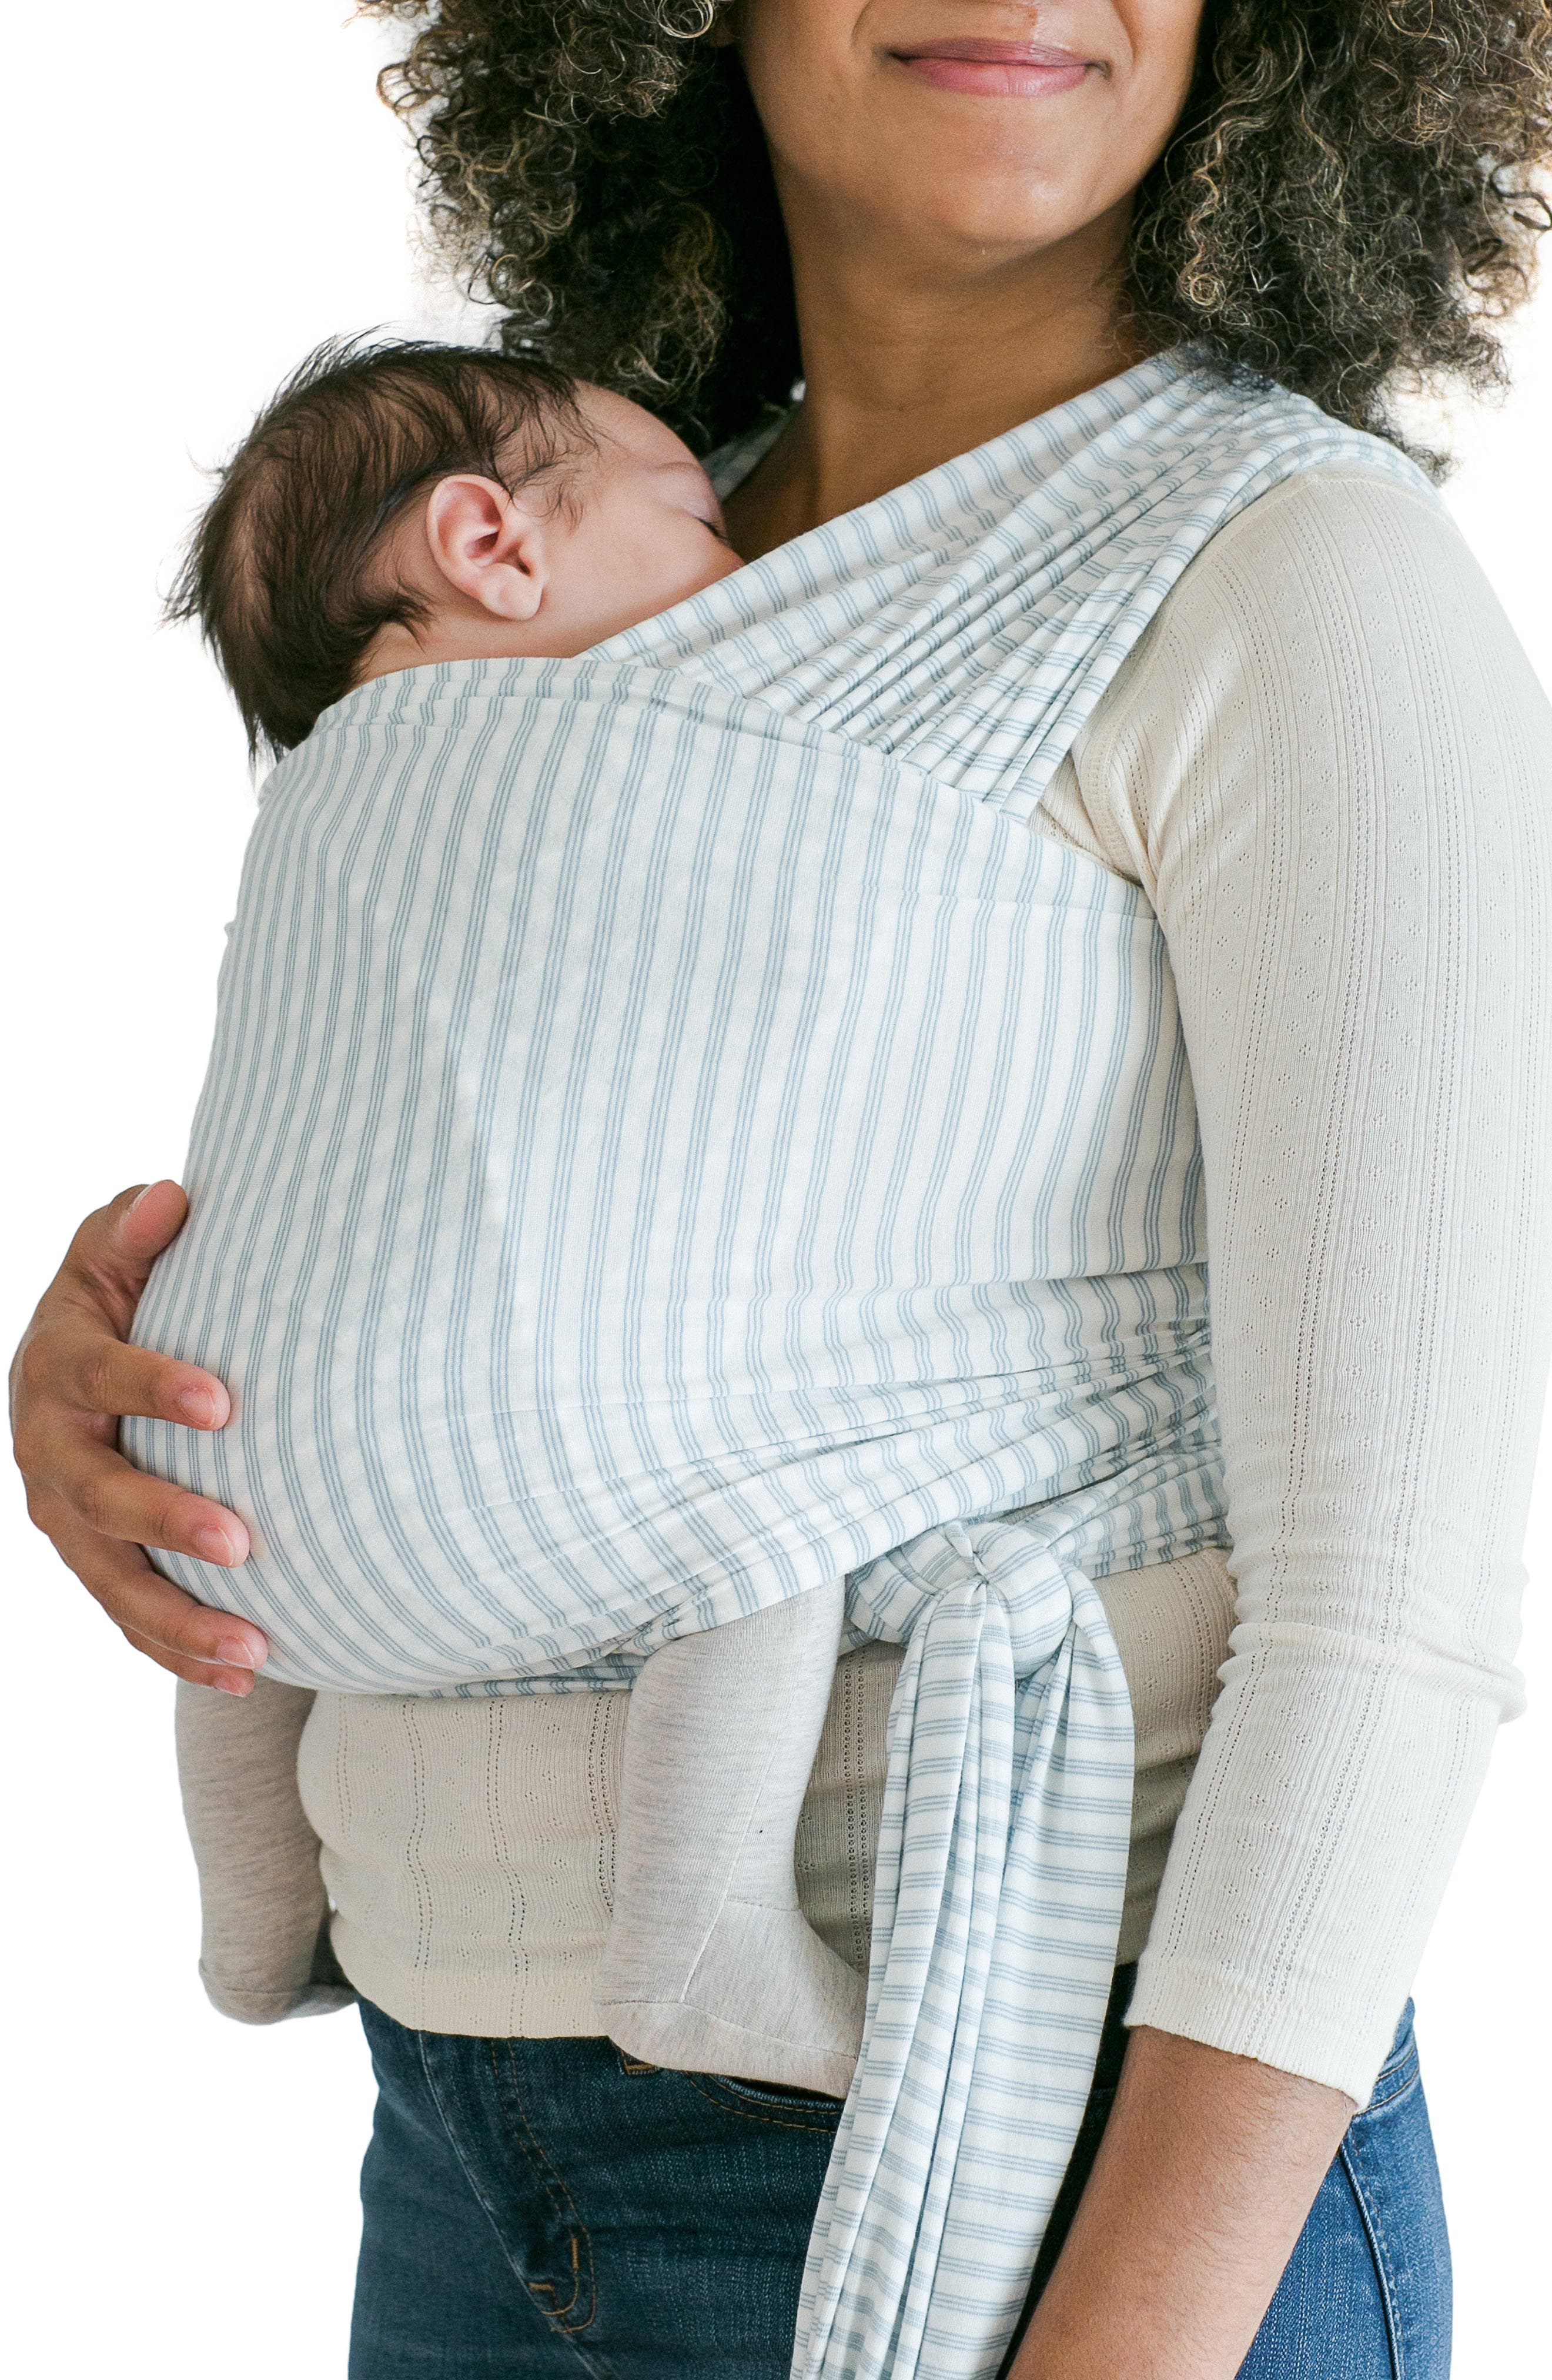 solly baby wrap dimensions